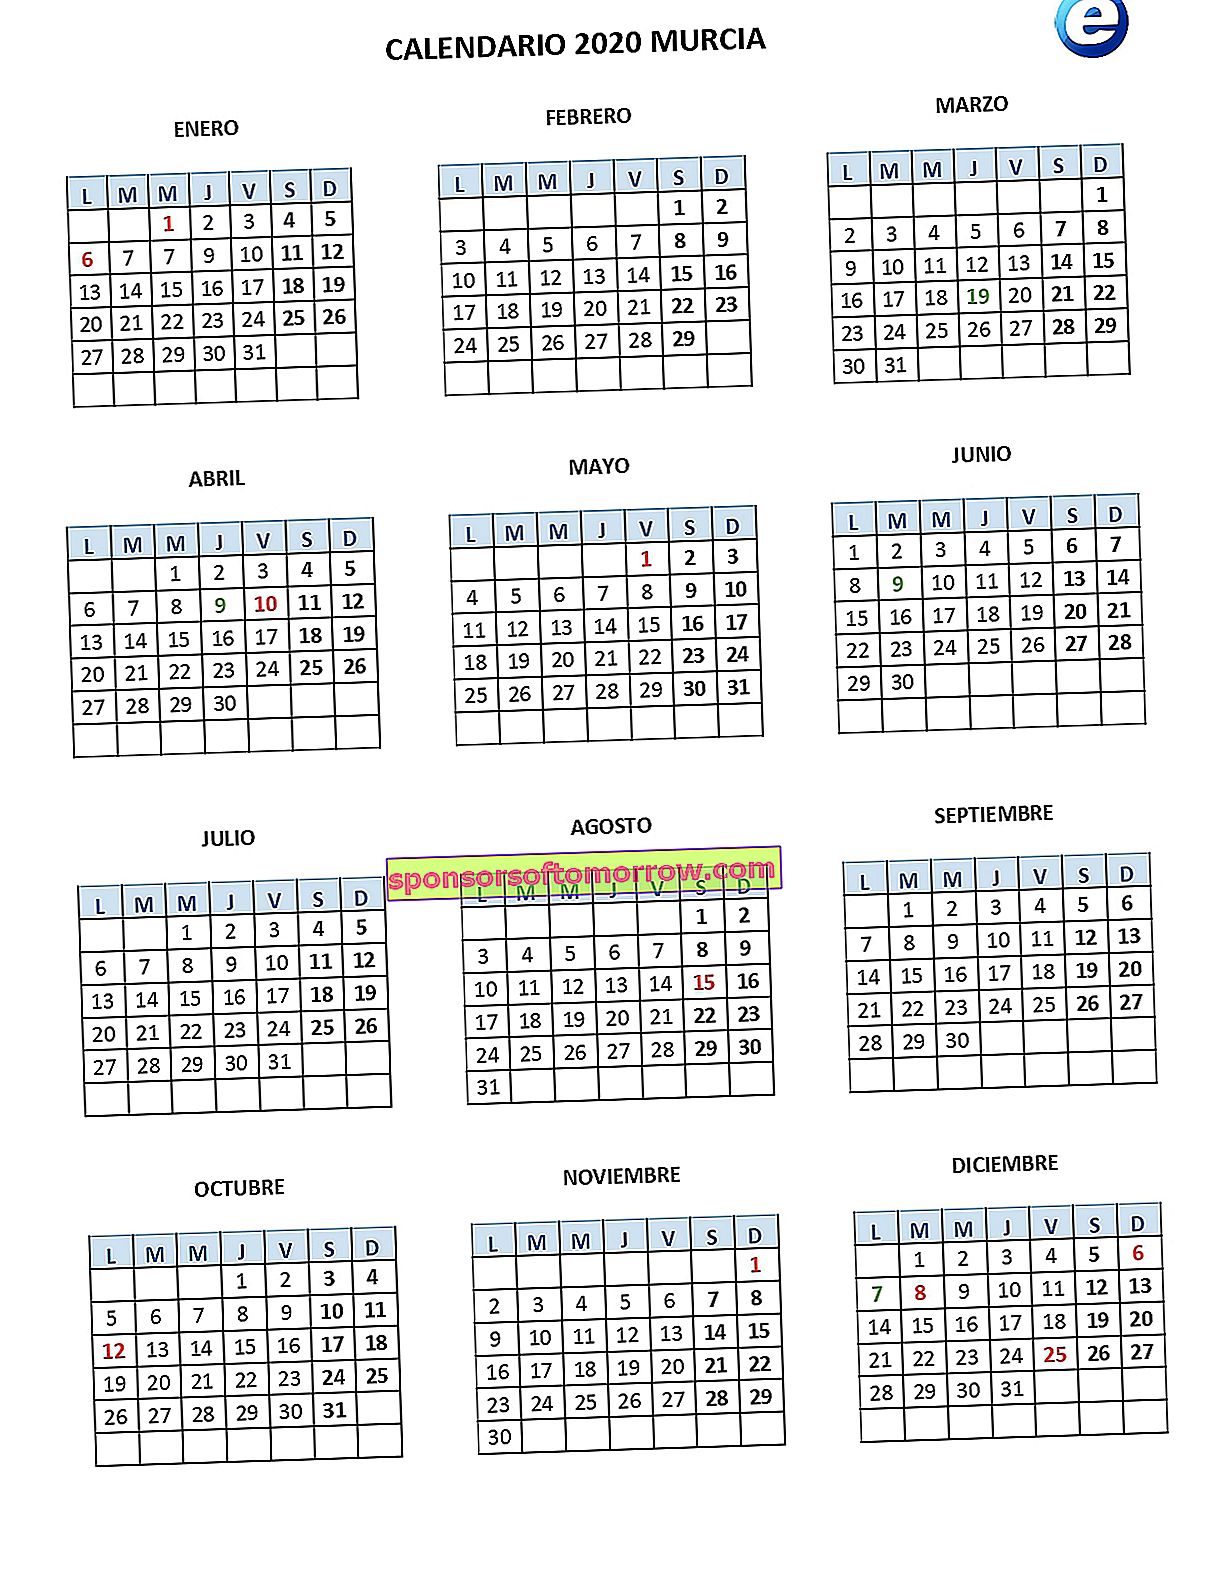 Murcie CALENDRIER 2020_pages-to-jpg-0001